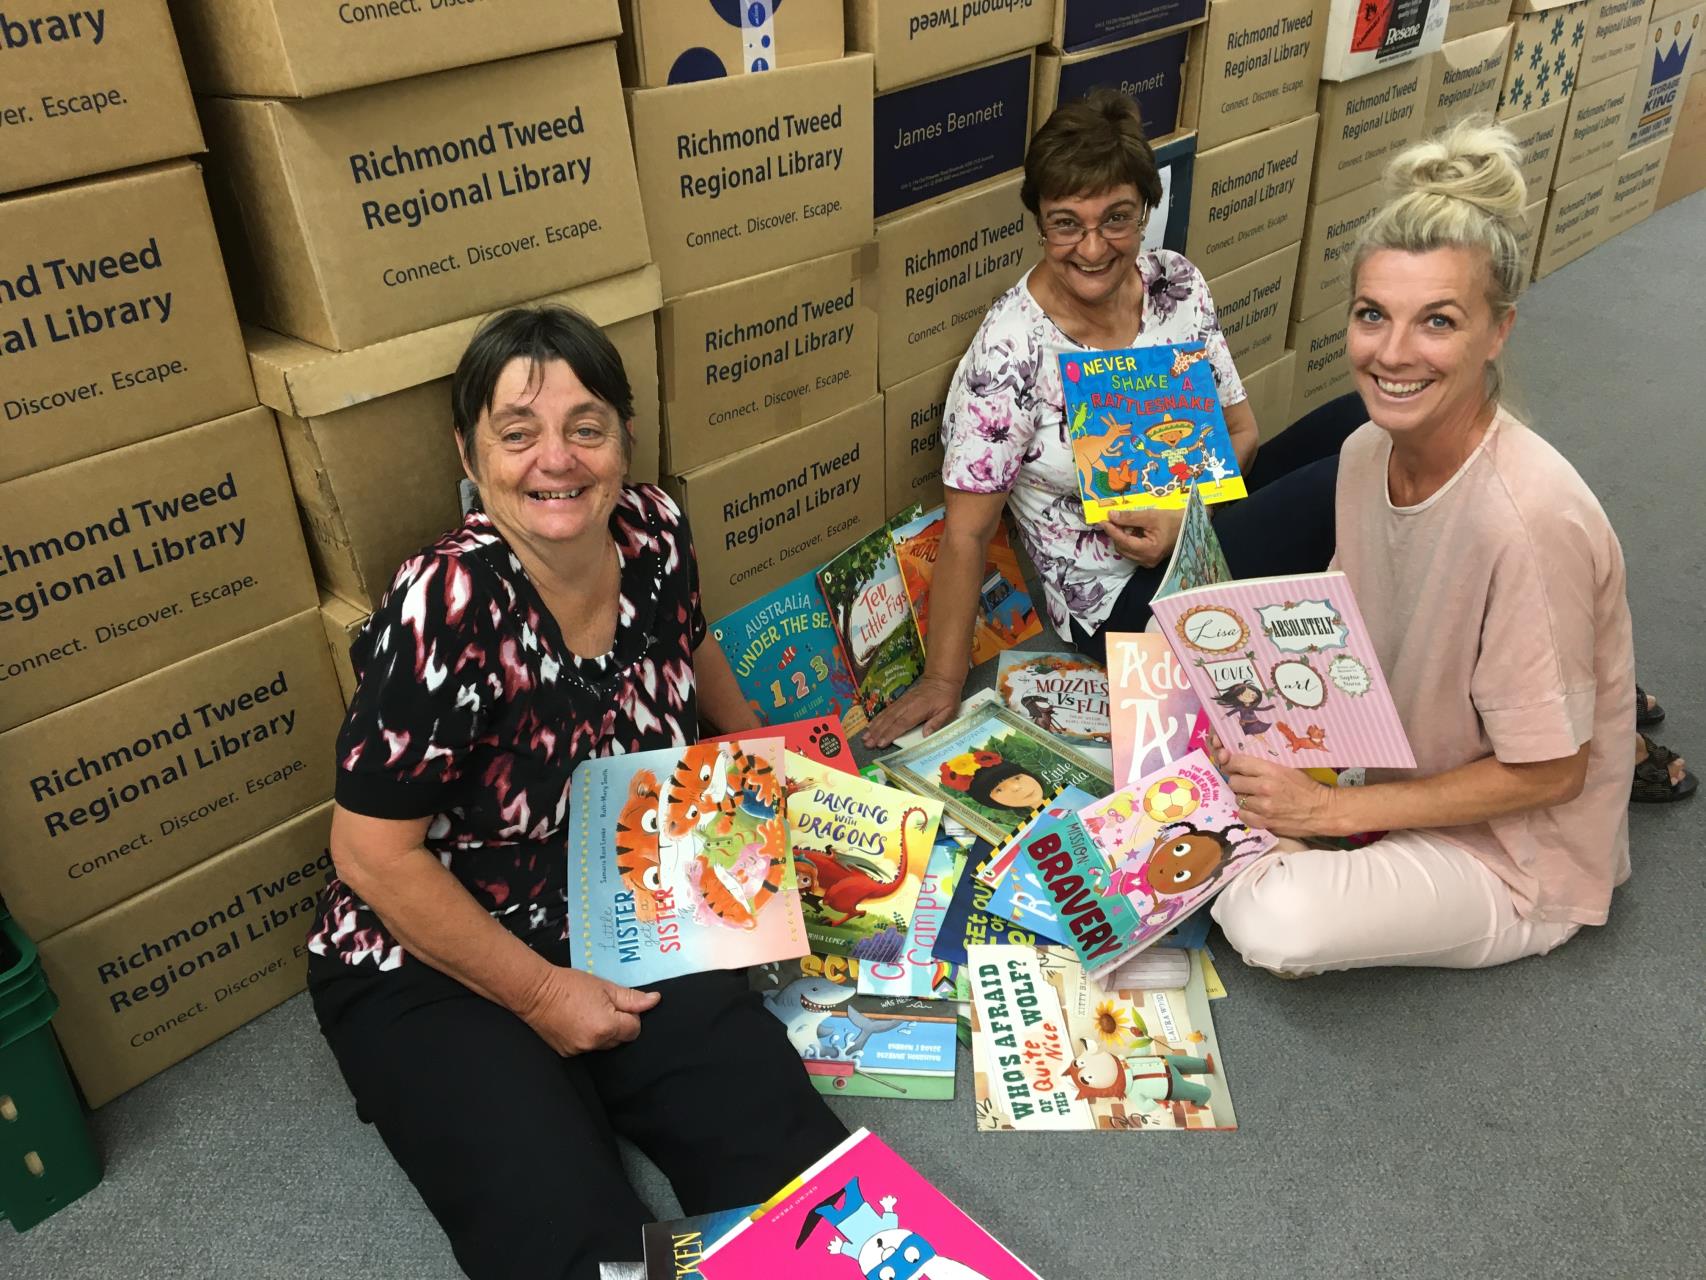 Hedland book donation supports flood-affected Lismore Library